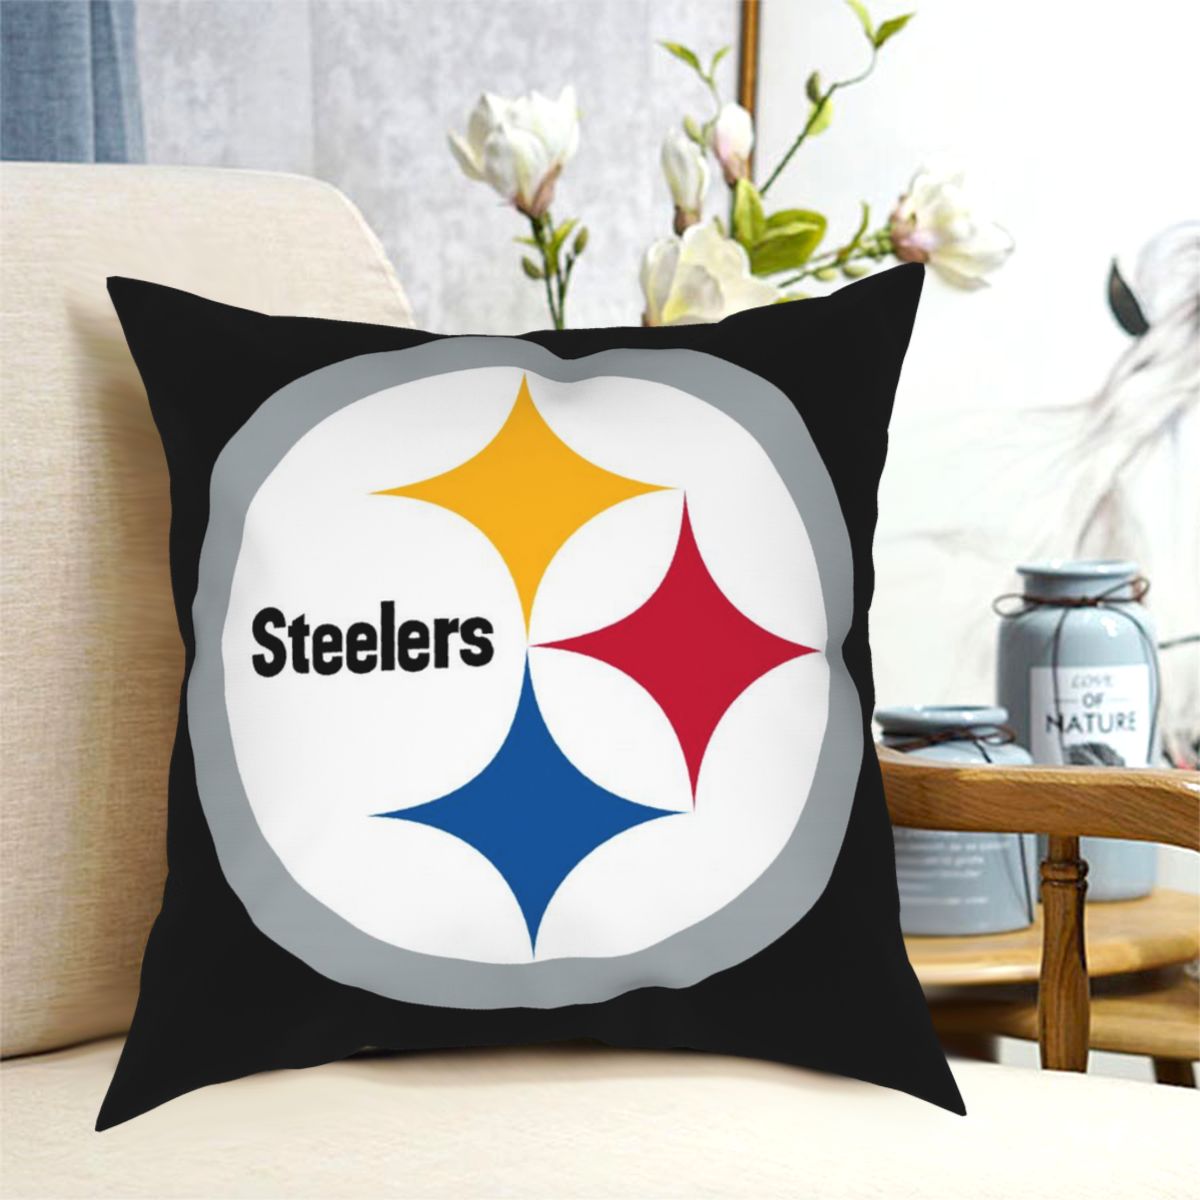 Custom Decorative Football Pillow Case Pittsburgh Steelers Black Pillowcase Personalized Throw Pillow Covers